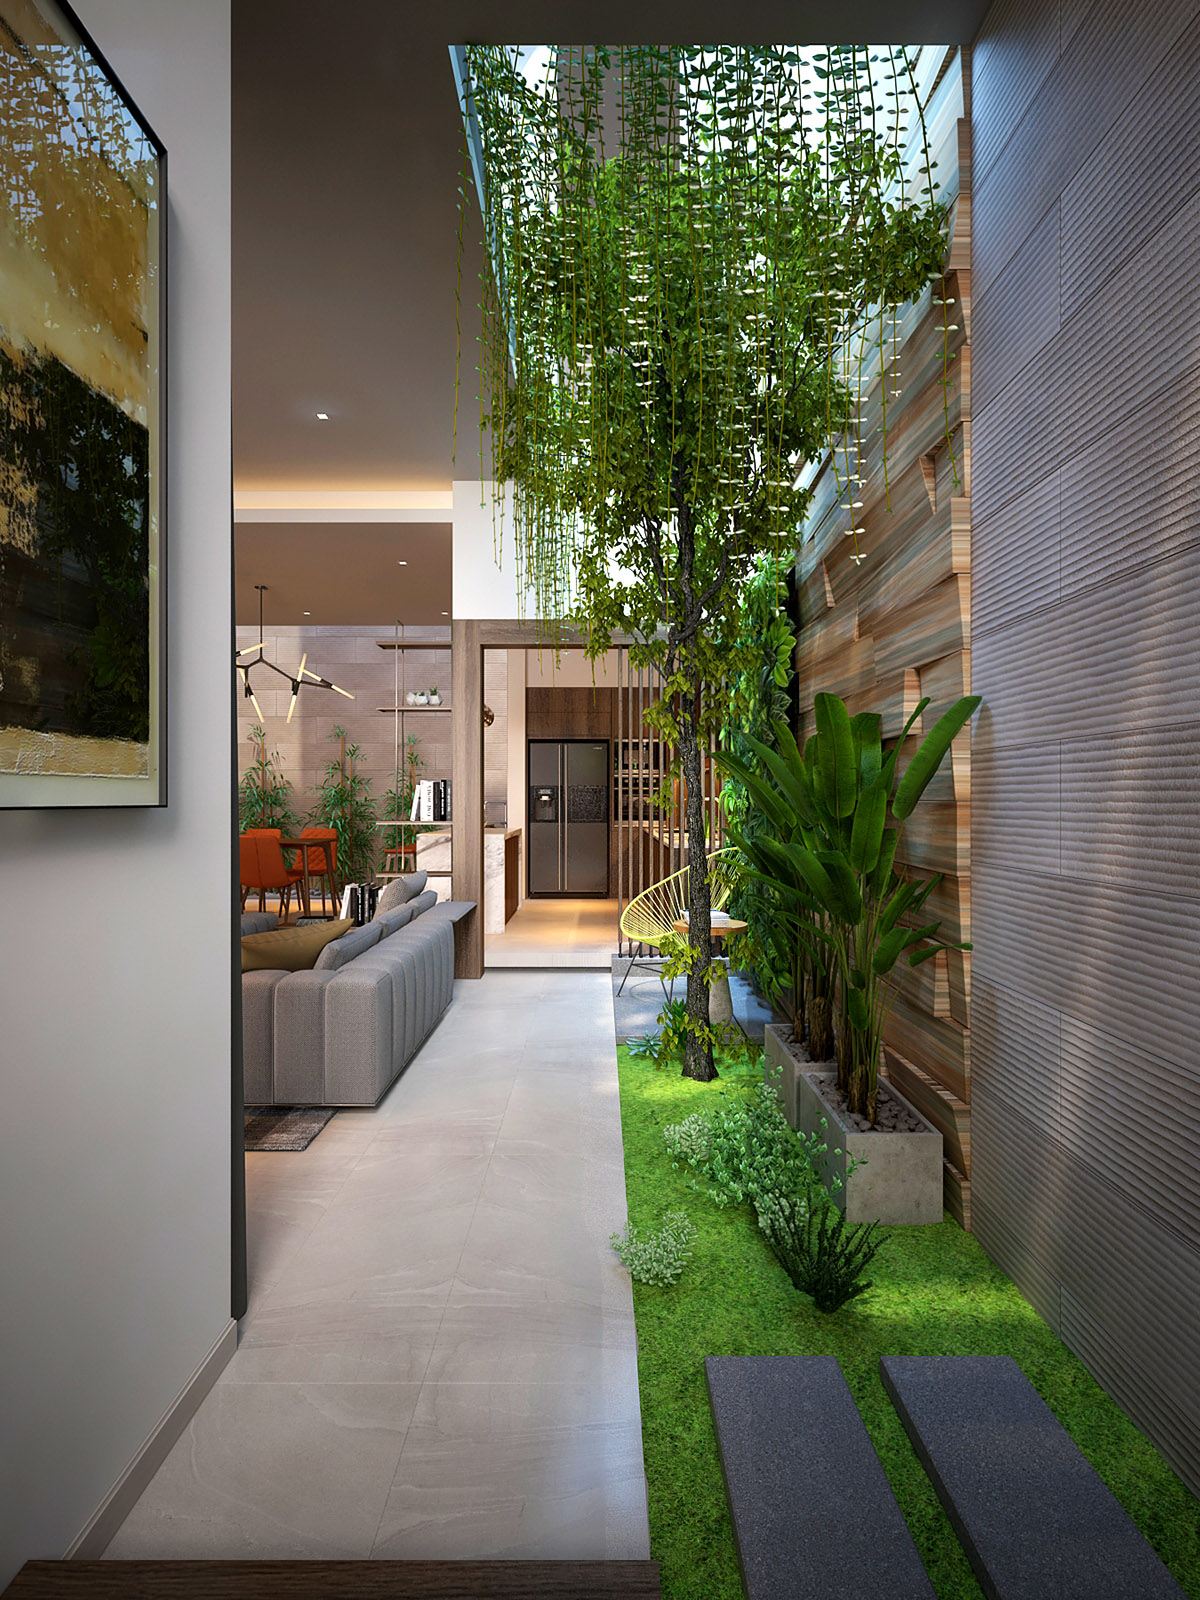 inside green spaces indoor courtyard homes small gardens garden courtyards room designing terrariums feature beautiful house interior living natural outdoor